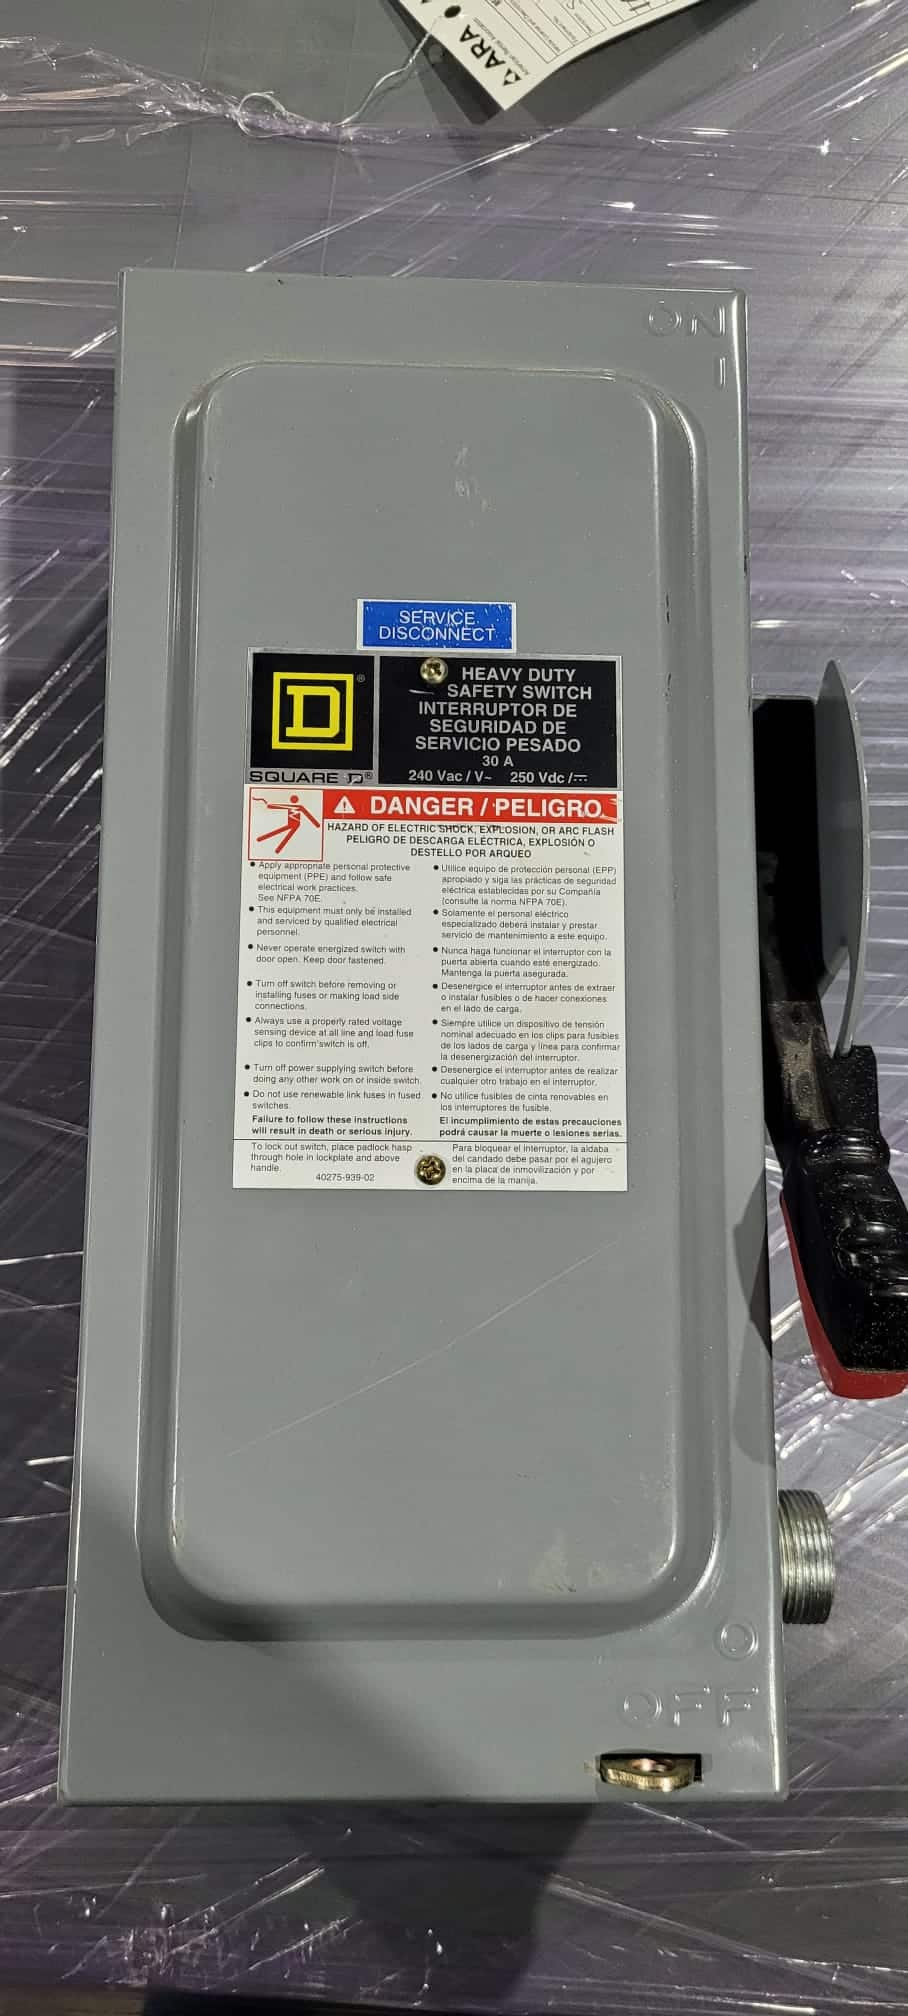 Used 30 Amp Square D Heavy Duty Safety Switch